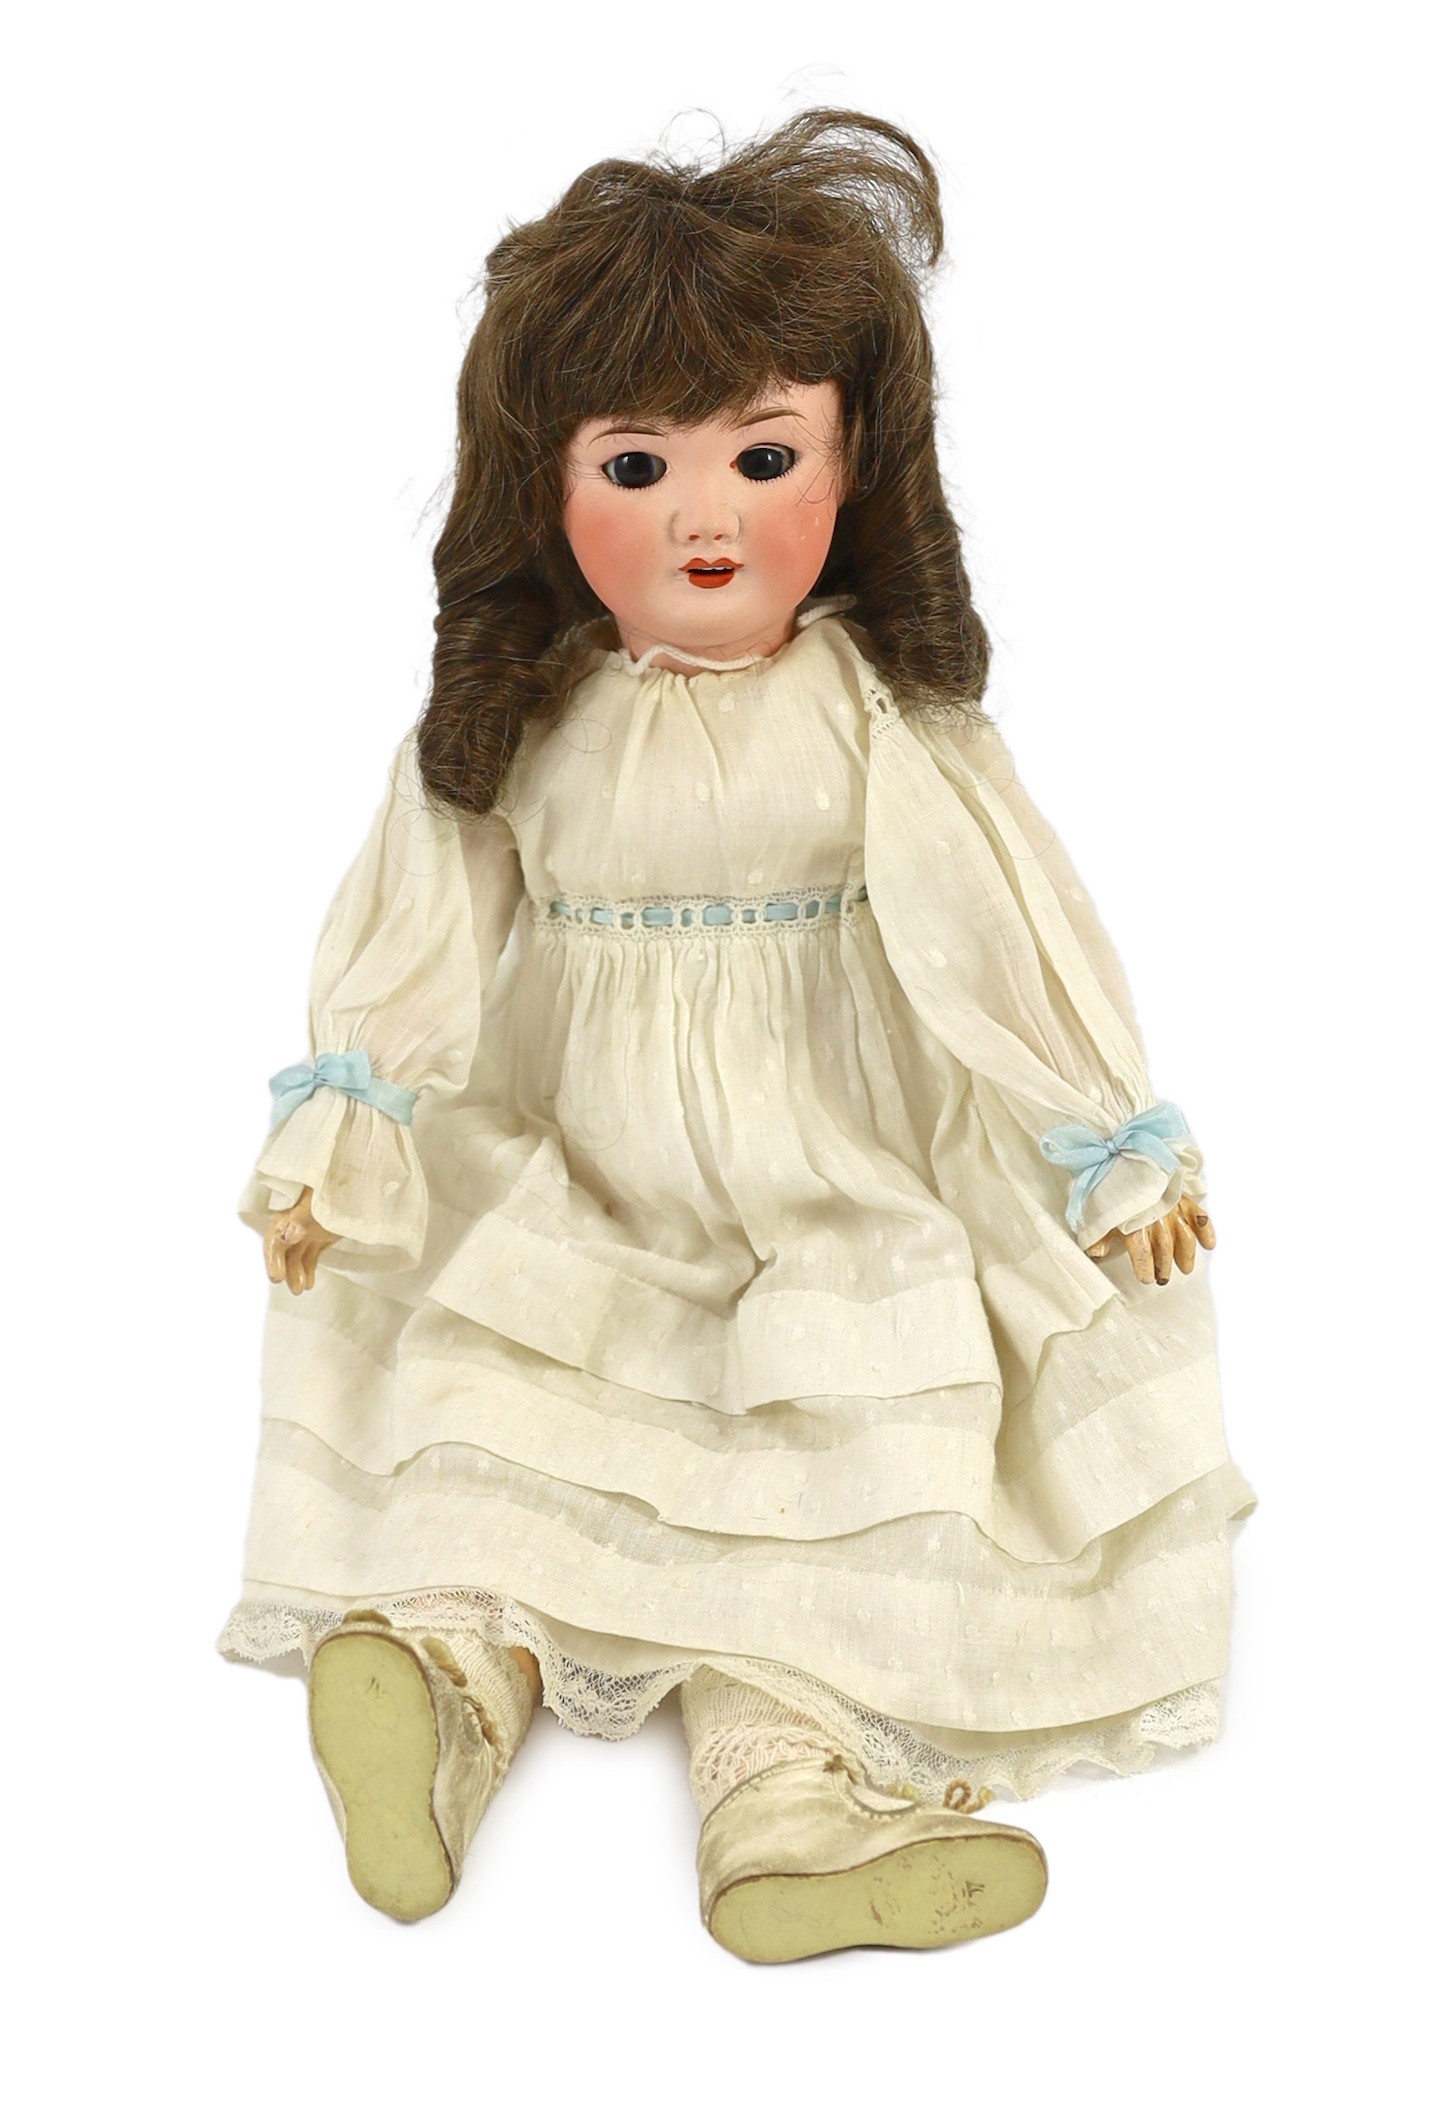 An SFBJ bisque doll, French, circa 1925, impressed 301 4, with open mouth, upper teeth, weighted